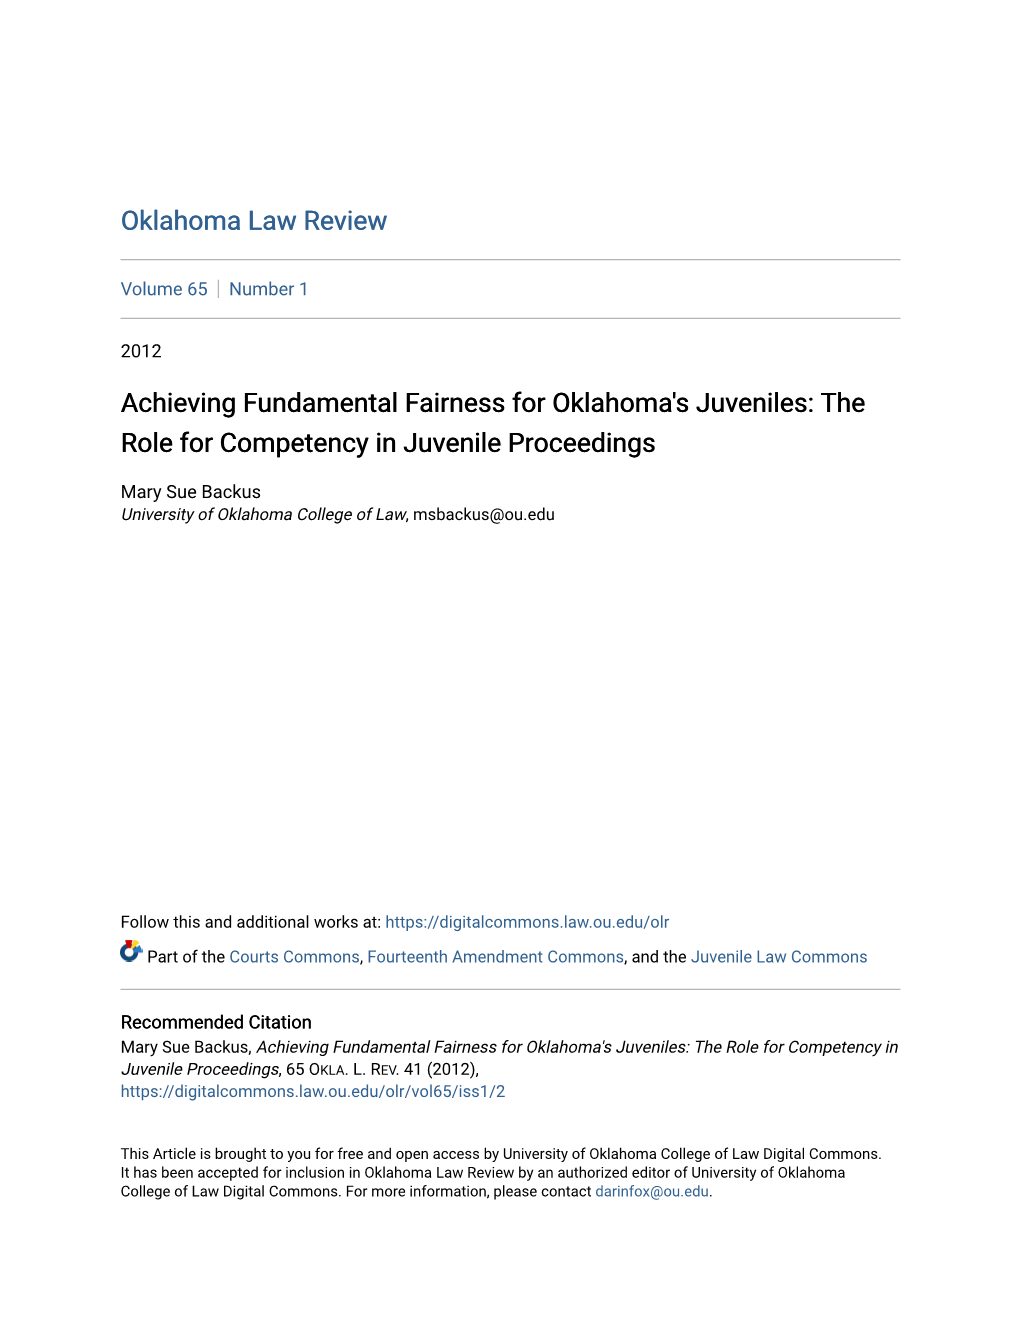 Achieving Fundamental Fairness for Oklahoma's Juveniles: the Role for Competency in Juvenile Proceedings